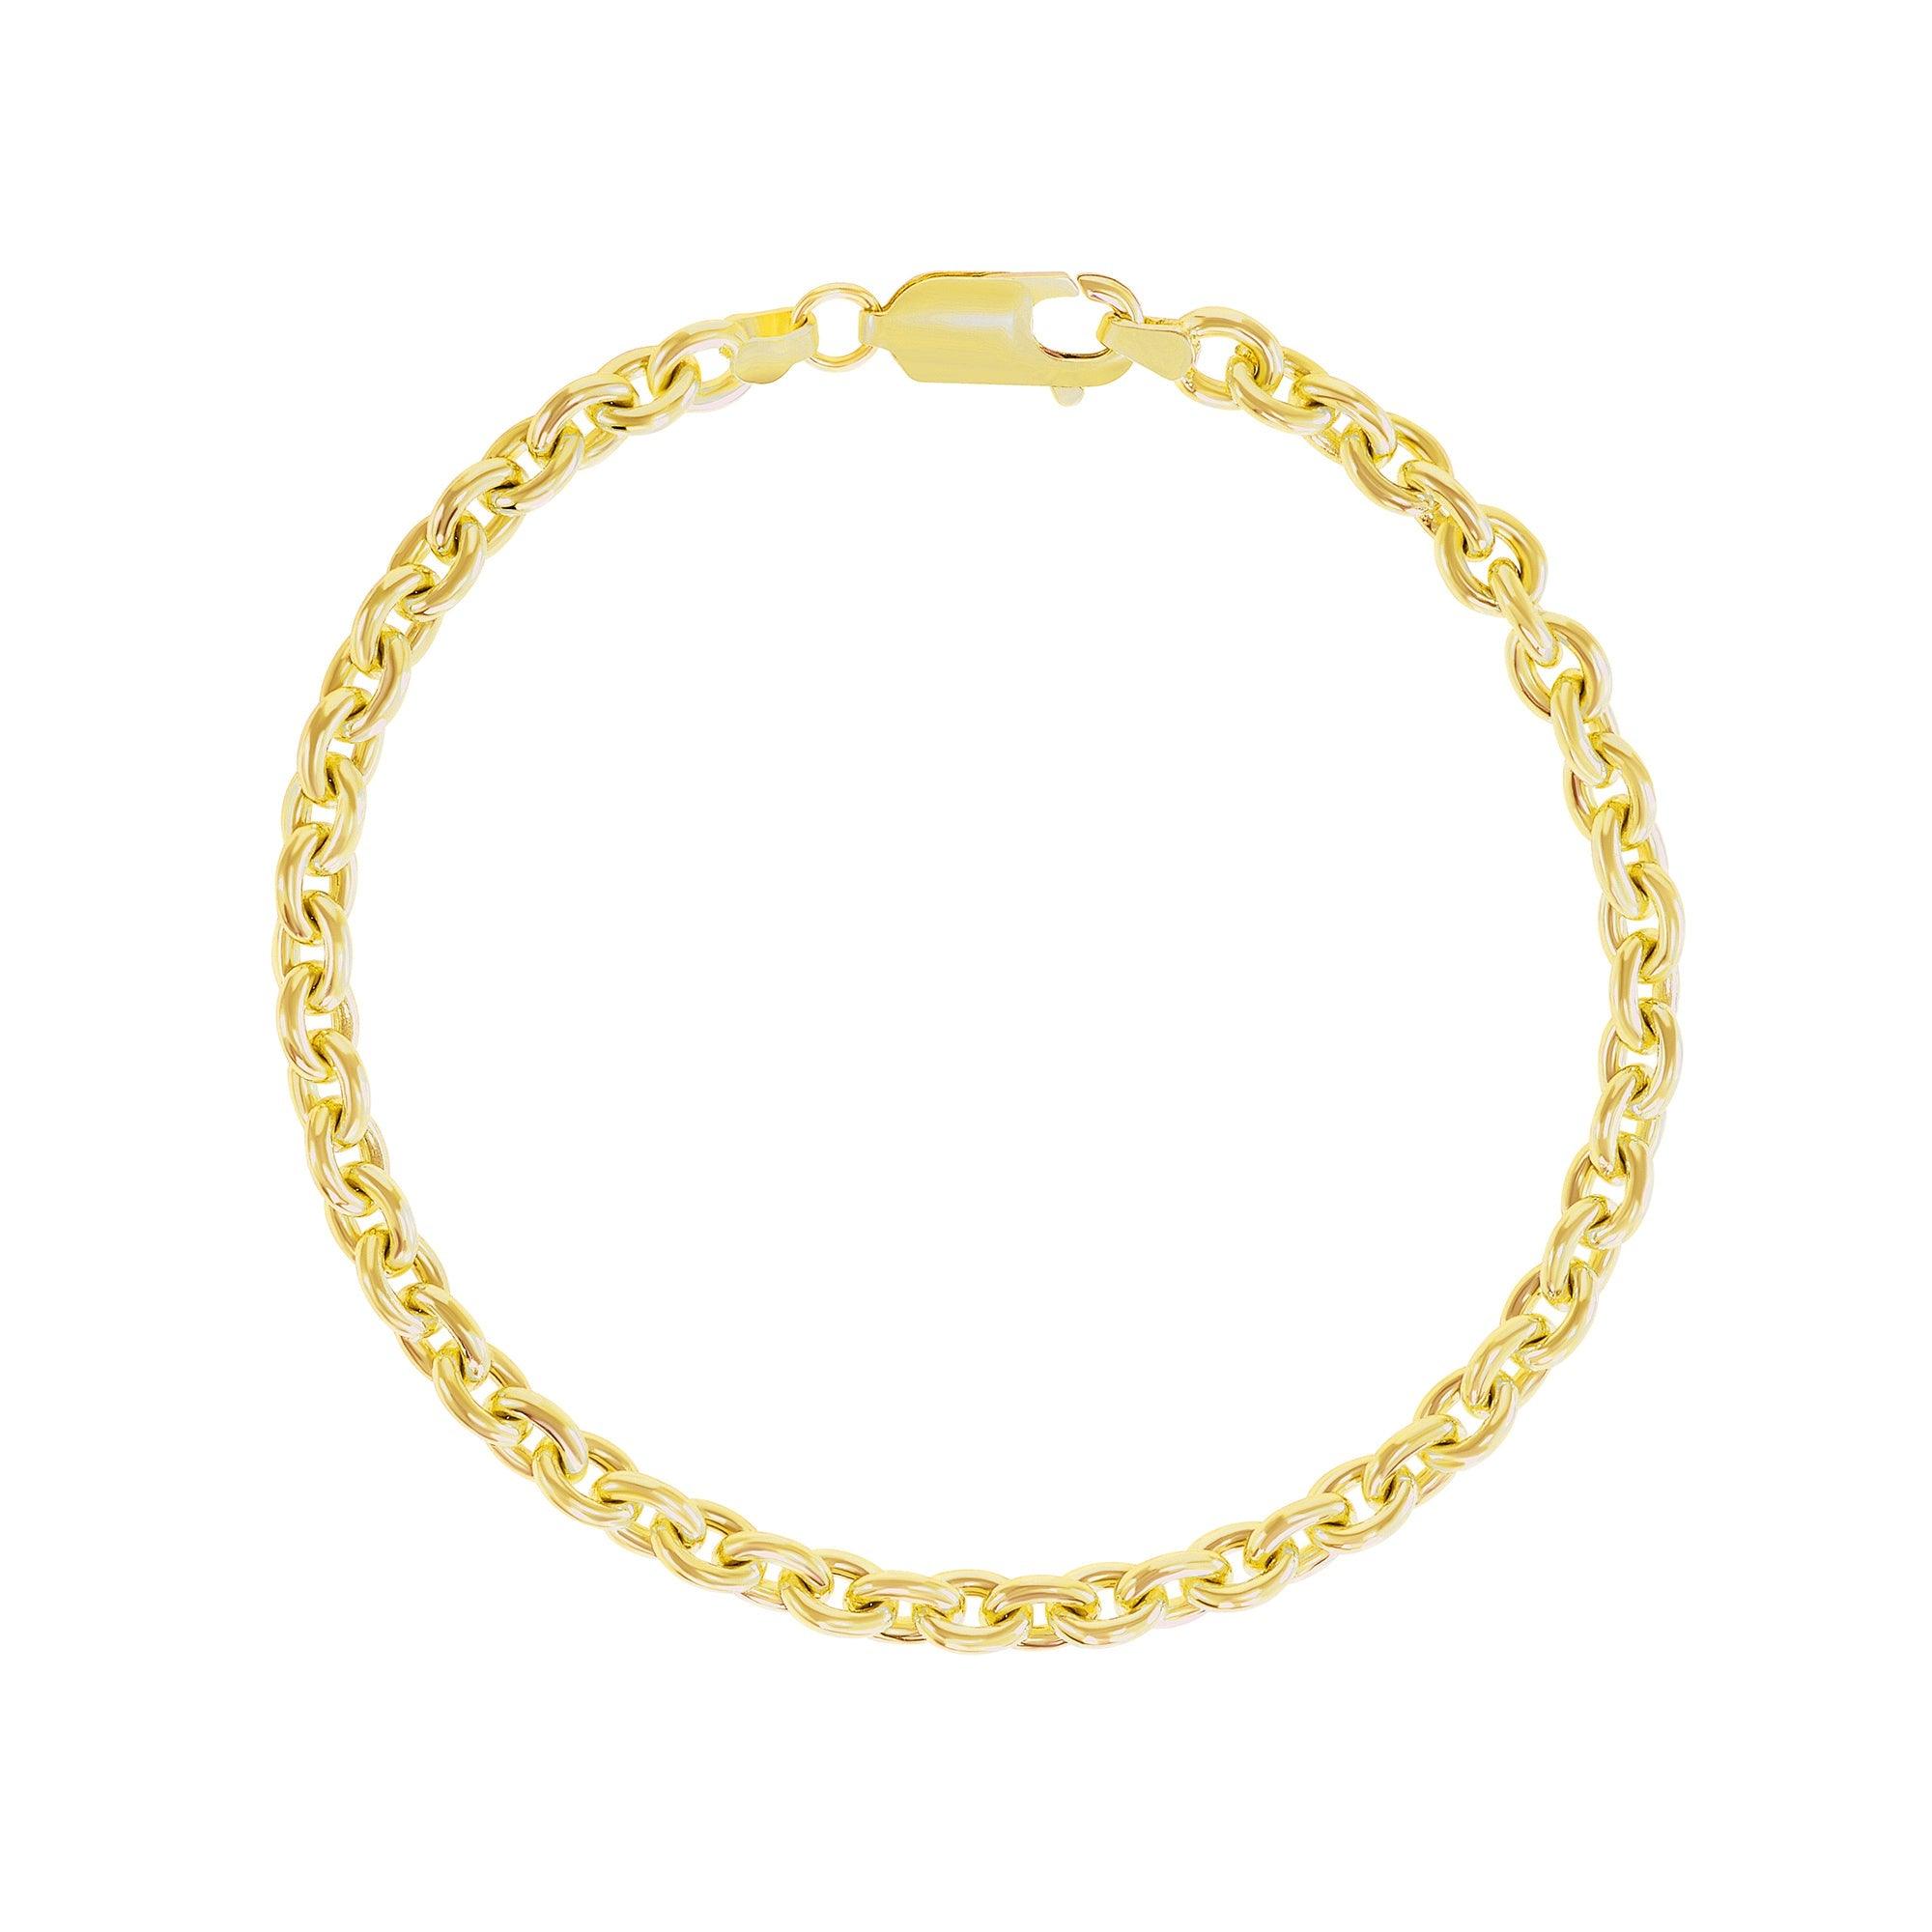 Solid Gold Cable Chain Bracelet for Both Men and Women from Rafi's Jewelry